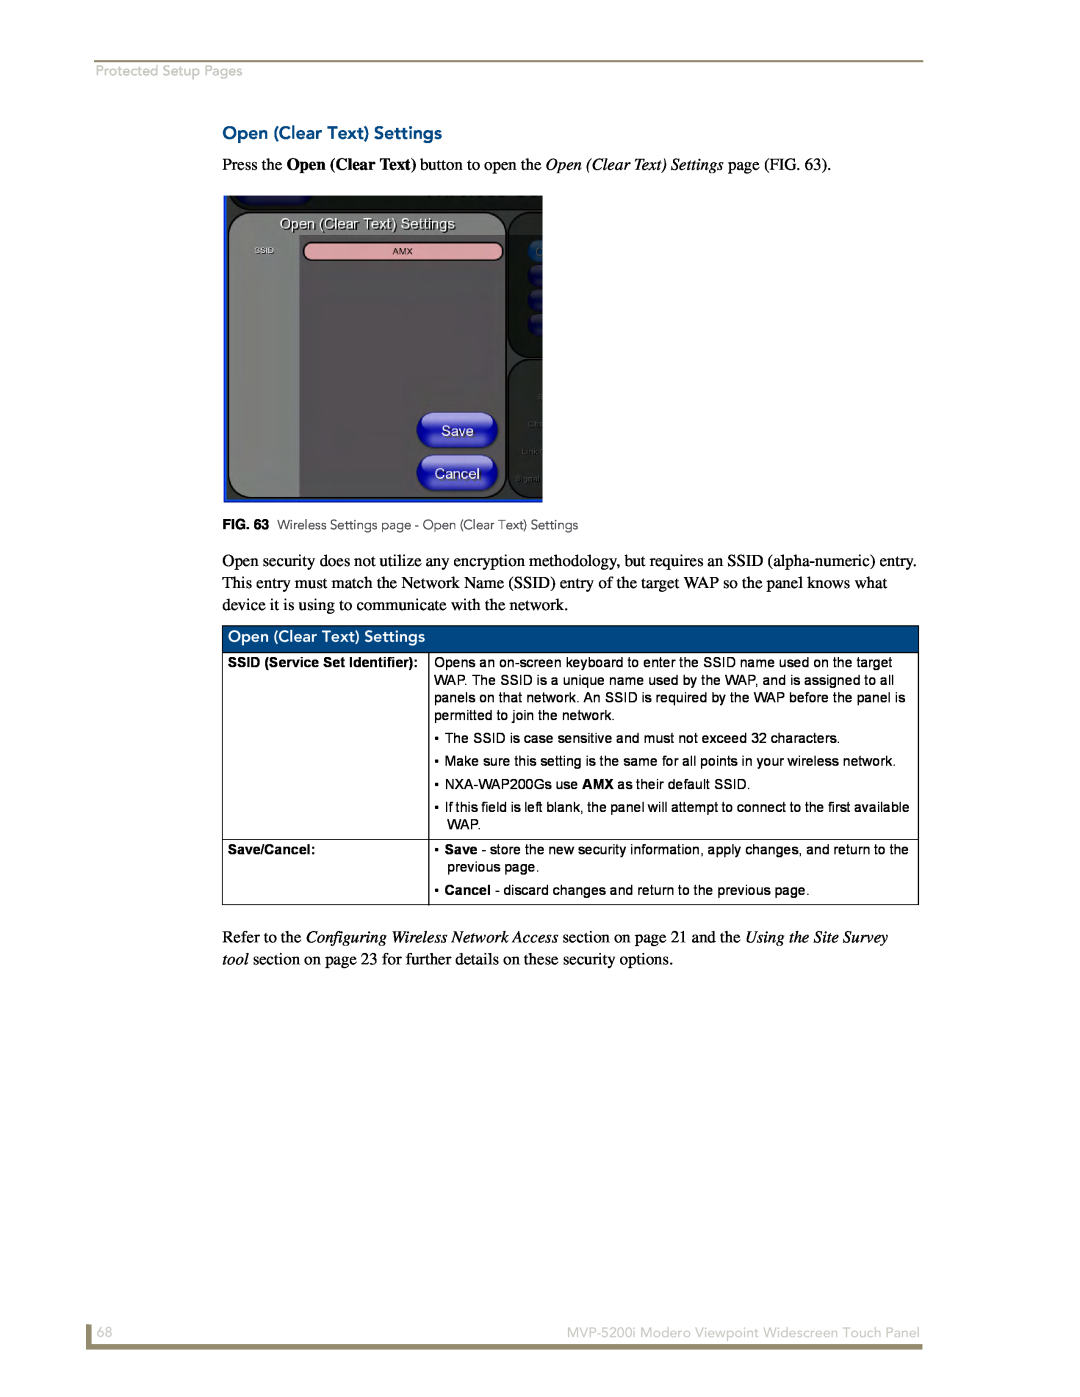 AMX MVP-5200i manual Open Clear Text Settings, tool section on page 23 for further details on these security options 